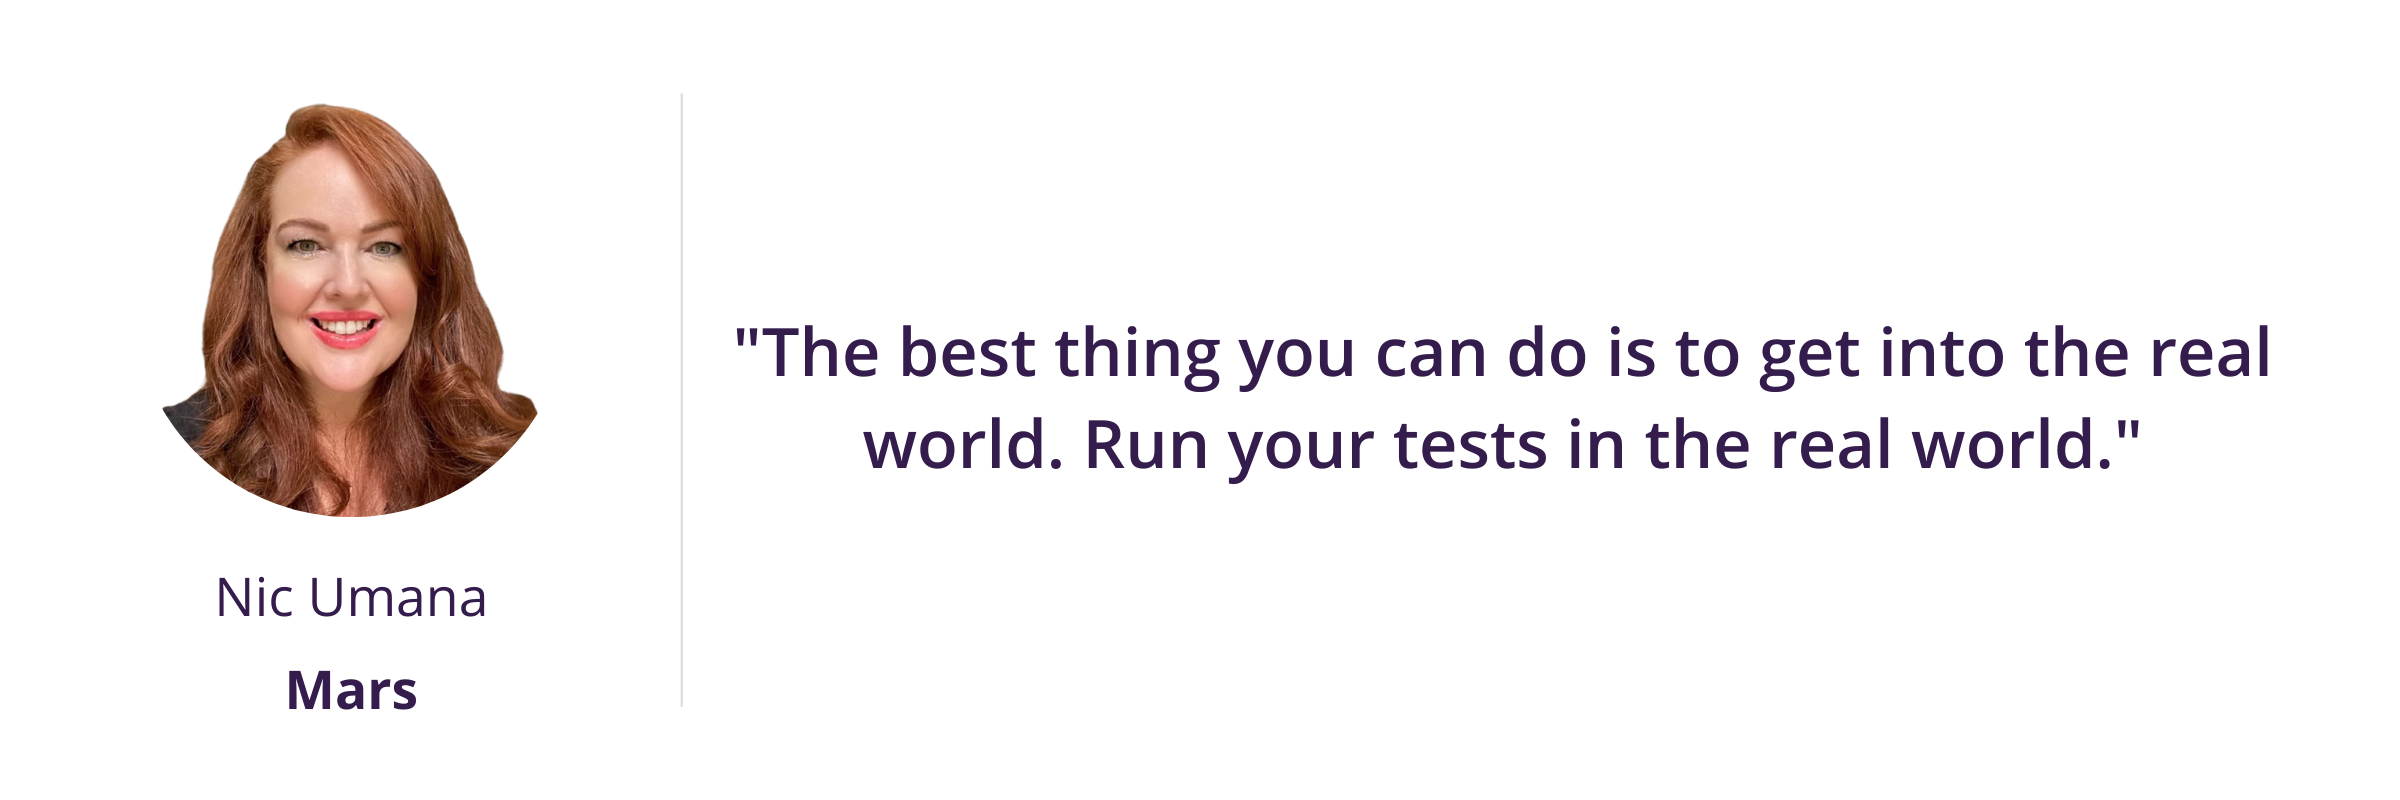 "The best thing you can do is to get into the real world. Run your tests in the real world."